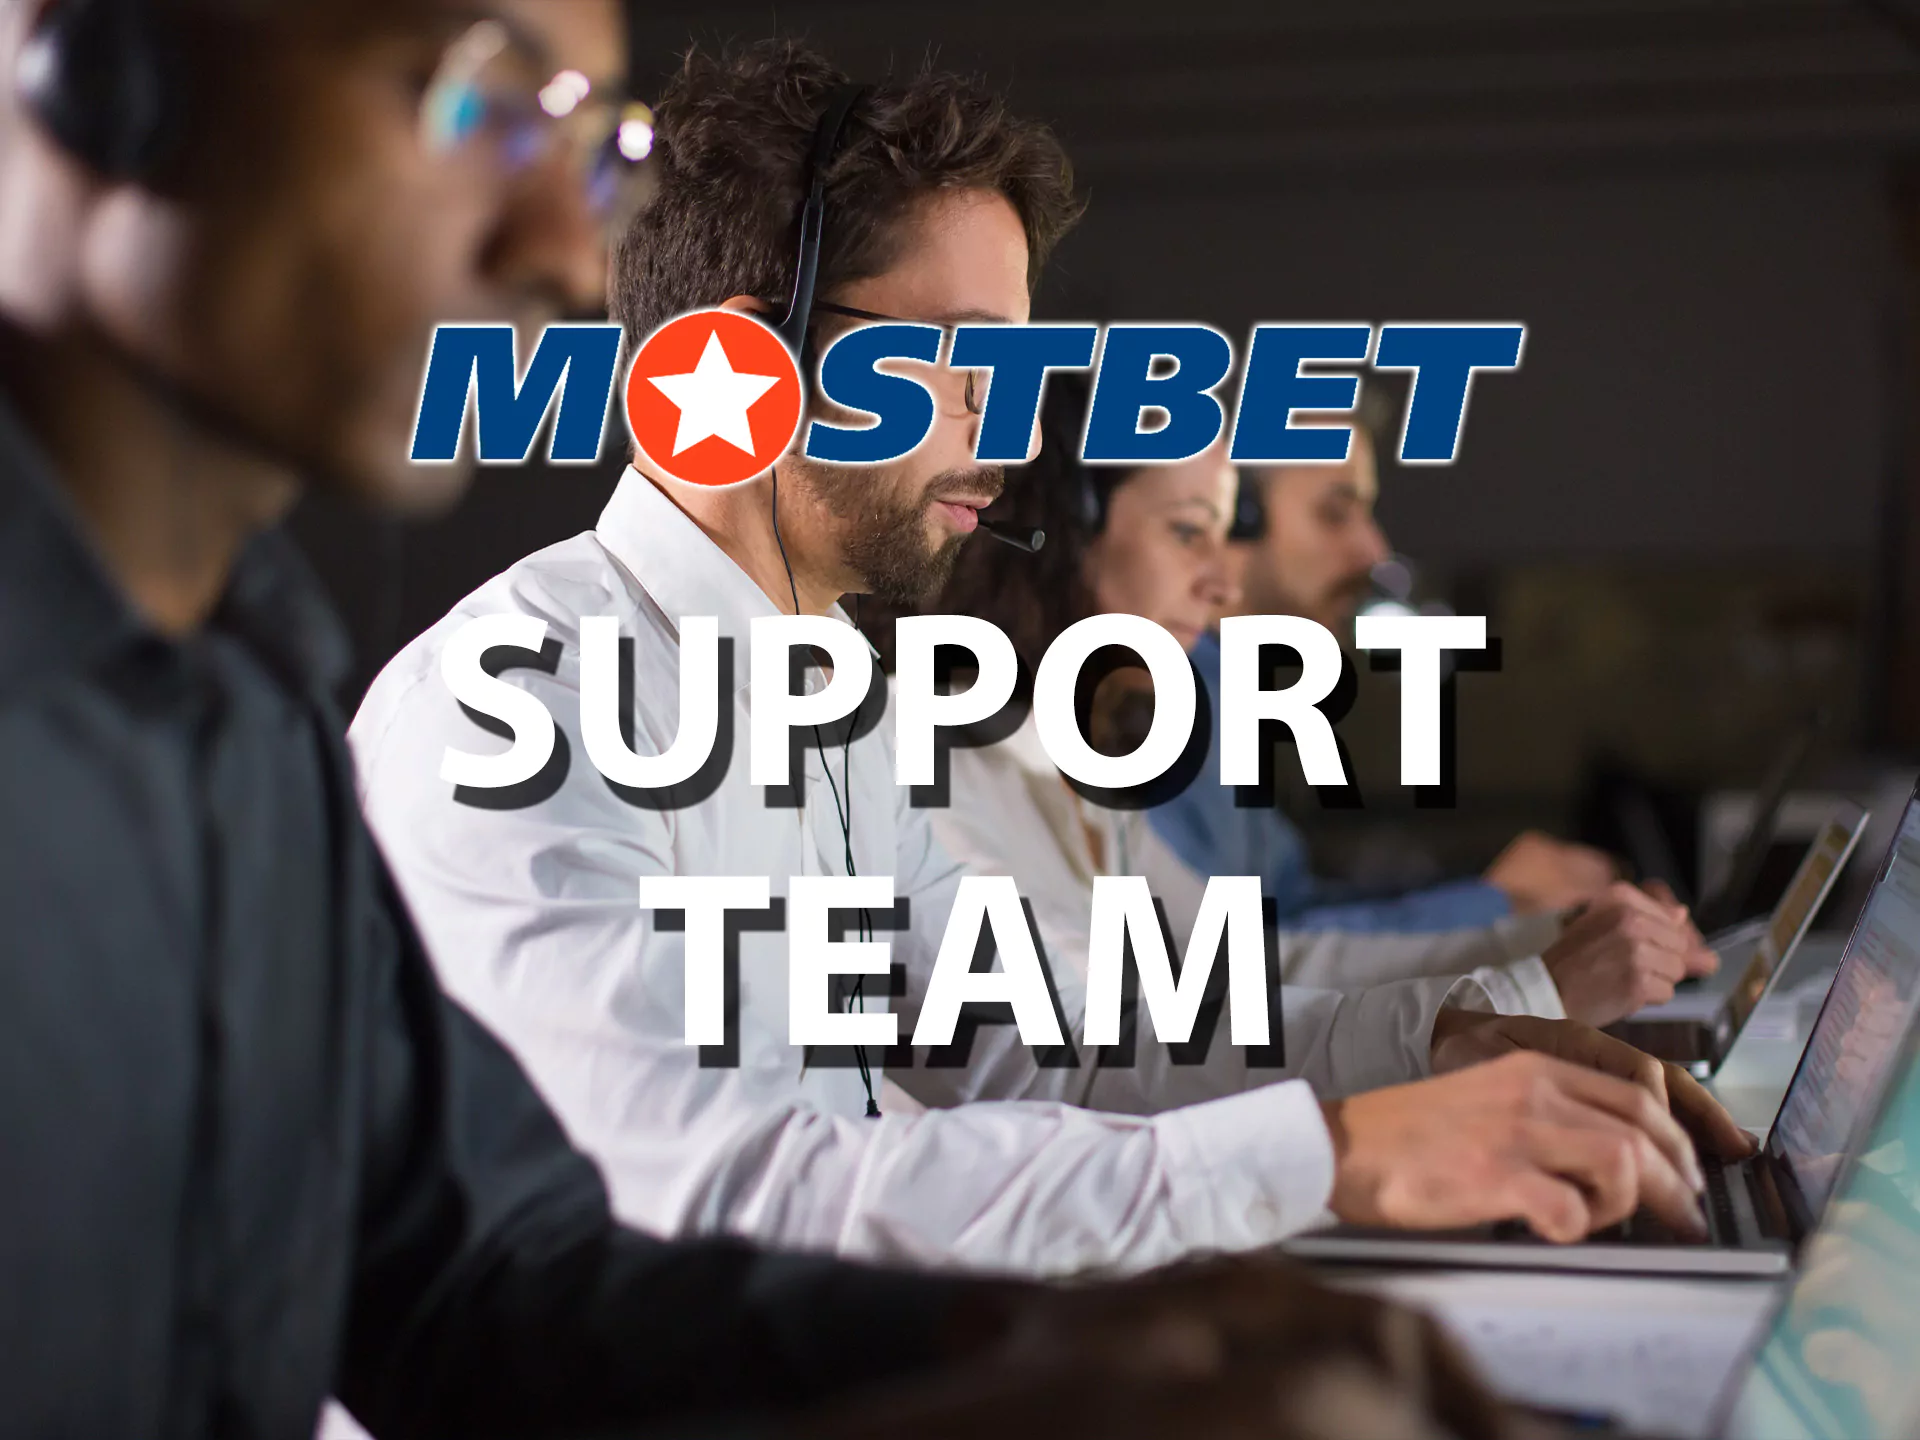 Fast-Track Your Online casino and betting company Mostbet Turkey